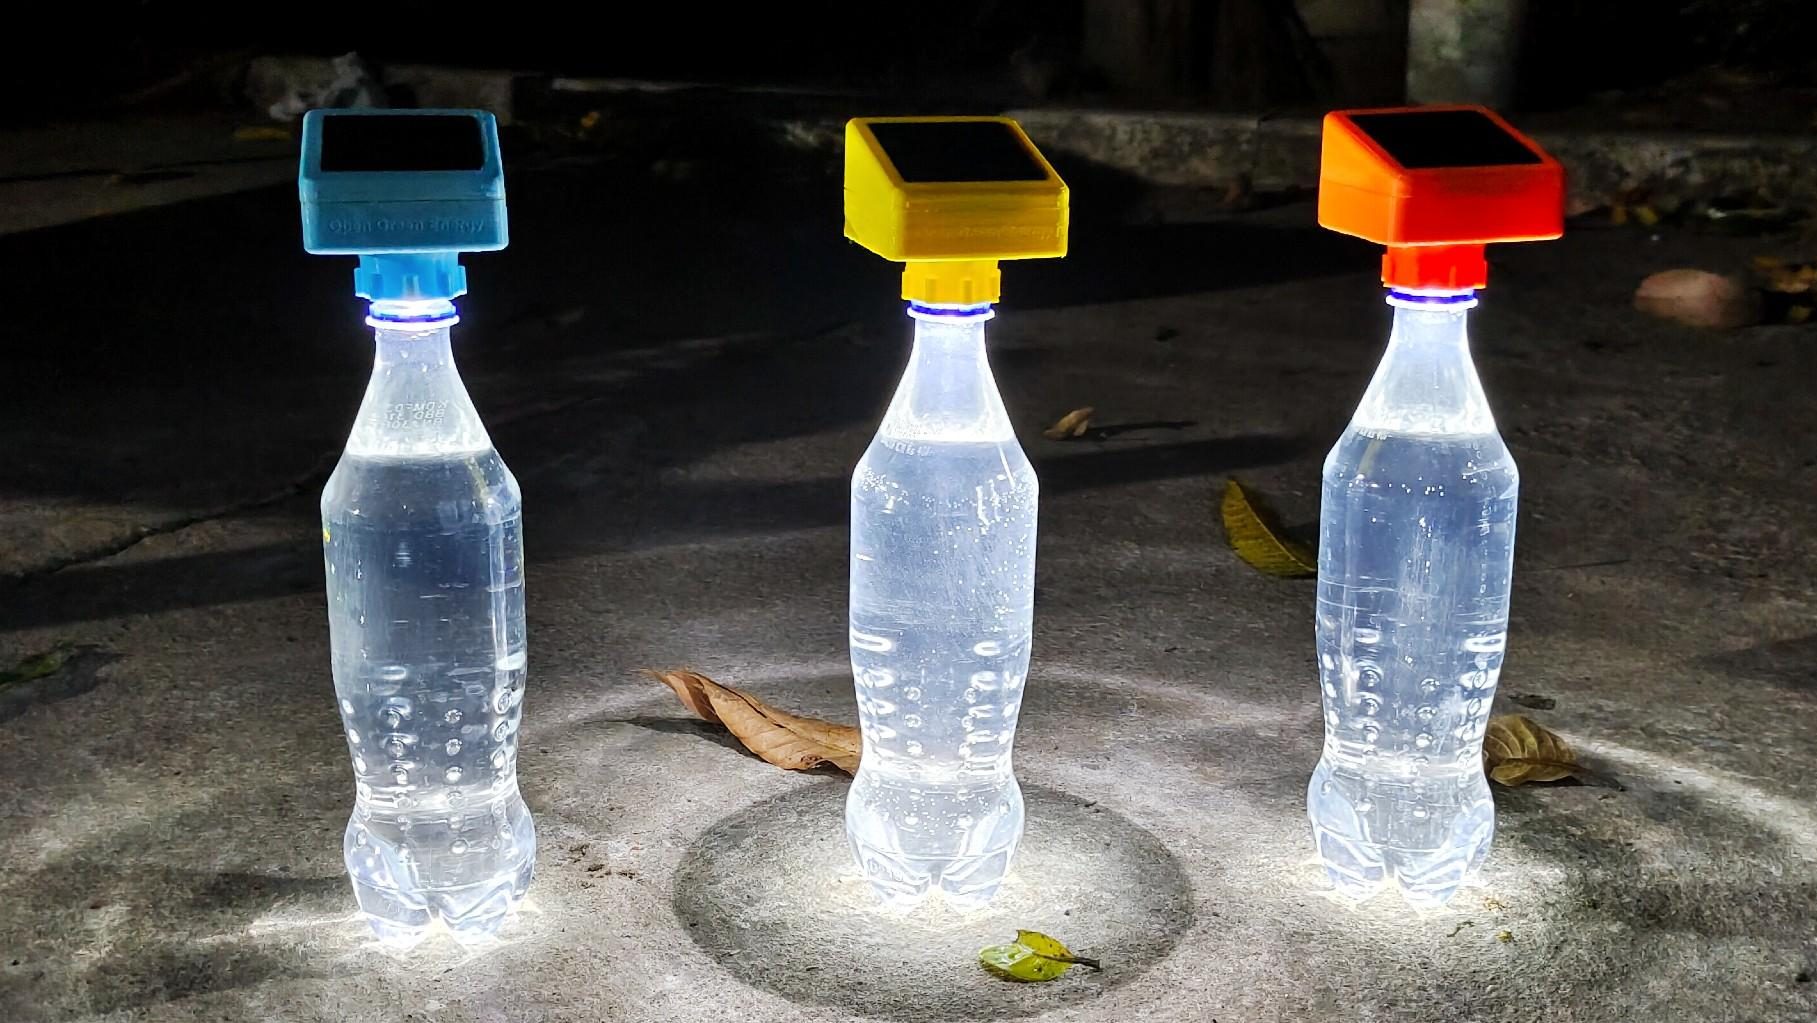 You Can Turn Soft Drink Bottles Into Handy Solar Lamps